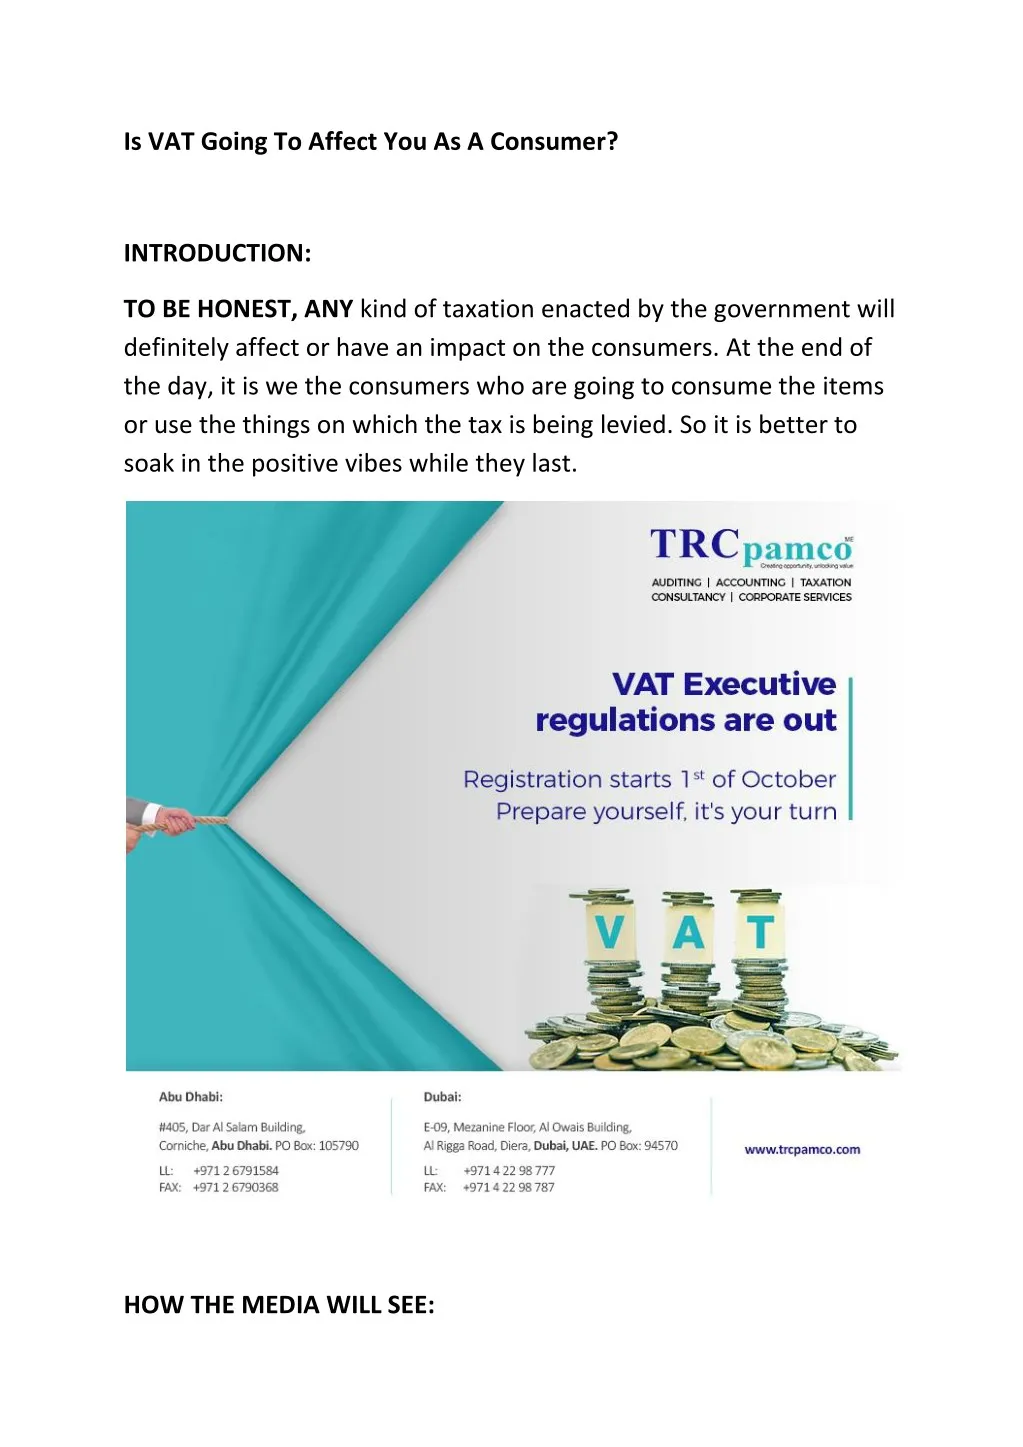 is vat going to affect you as a consumer